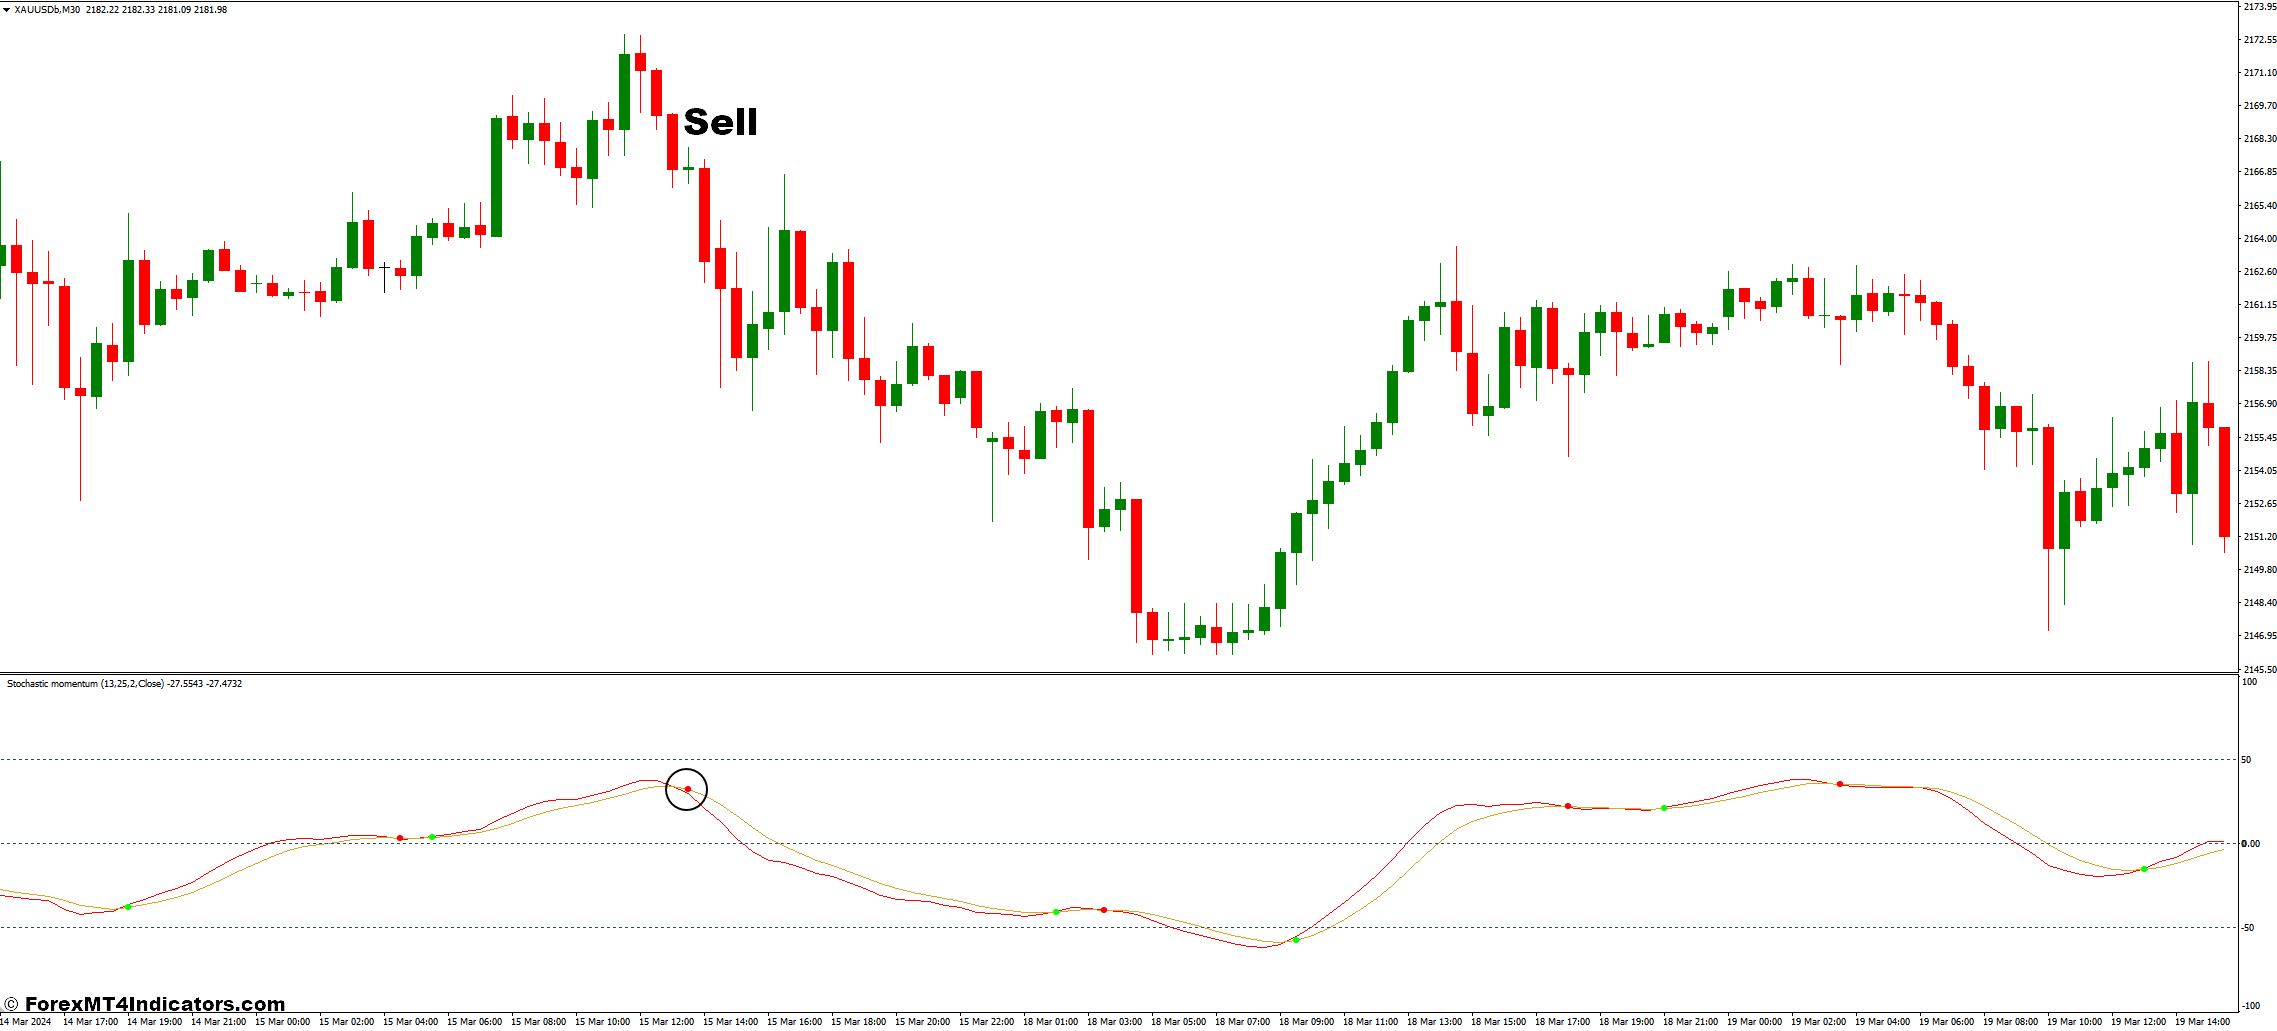 How to Trade with Stochastic Momentum with Arrows Indicator - Sell Entry